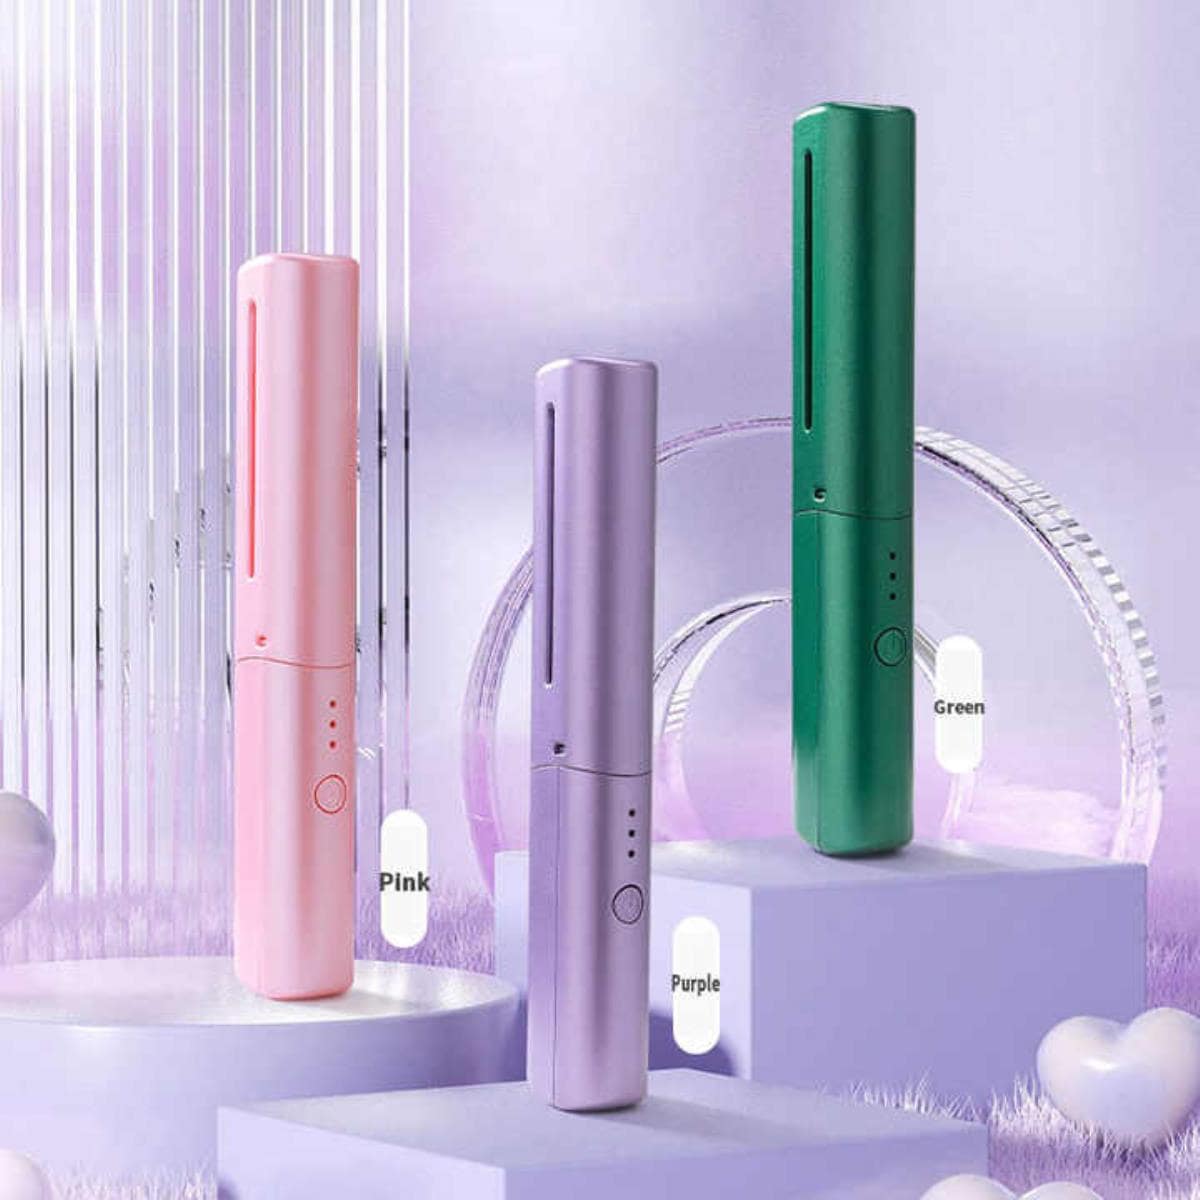 Rechargeable Mini Hair Straightener (BUY MORE SAVE MORE )